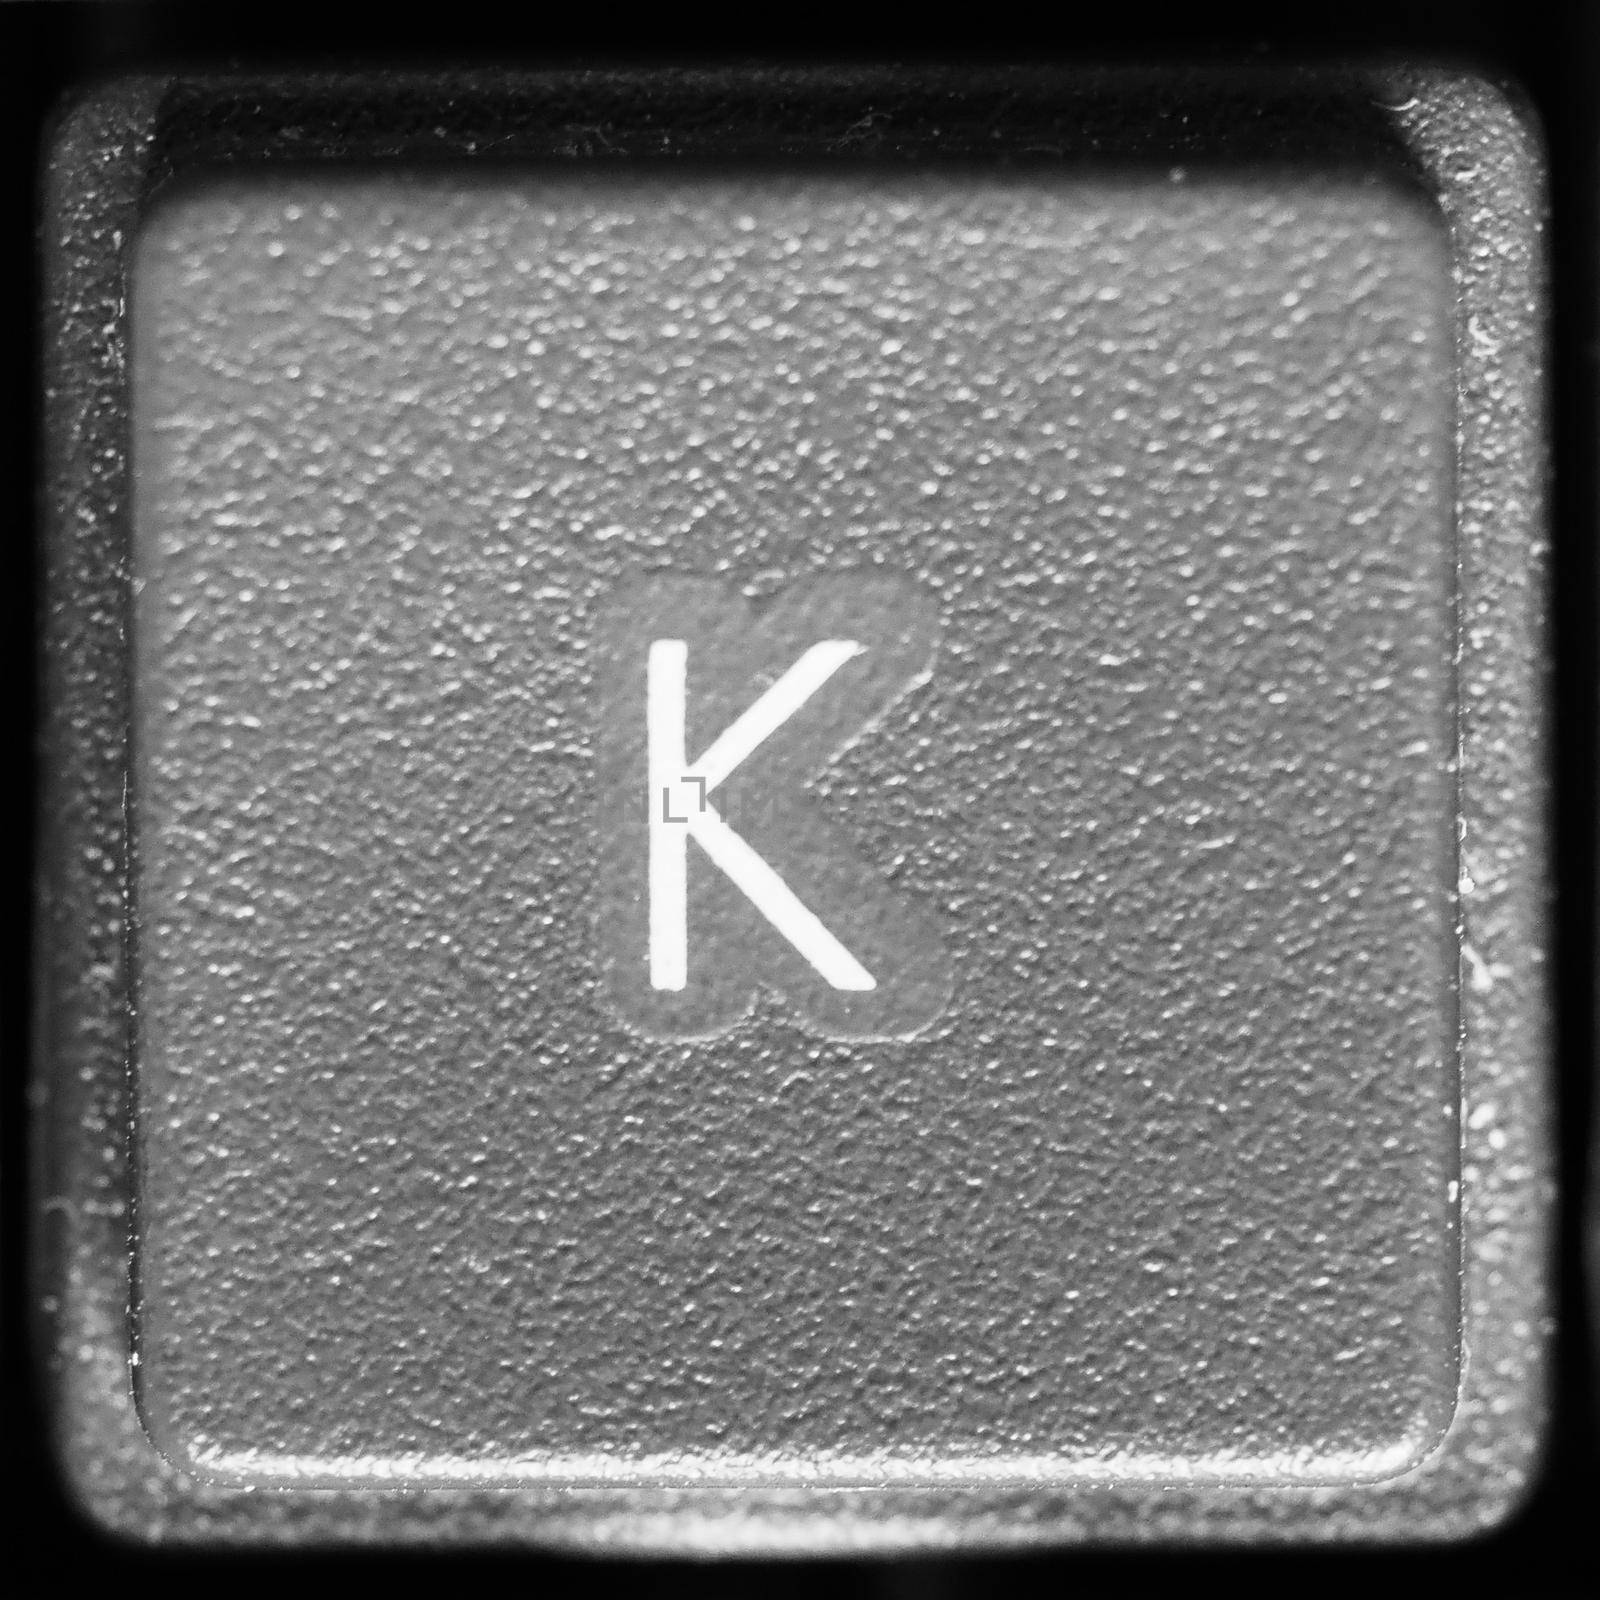 Letter K on computer keyboard by claudiodivizia